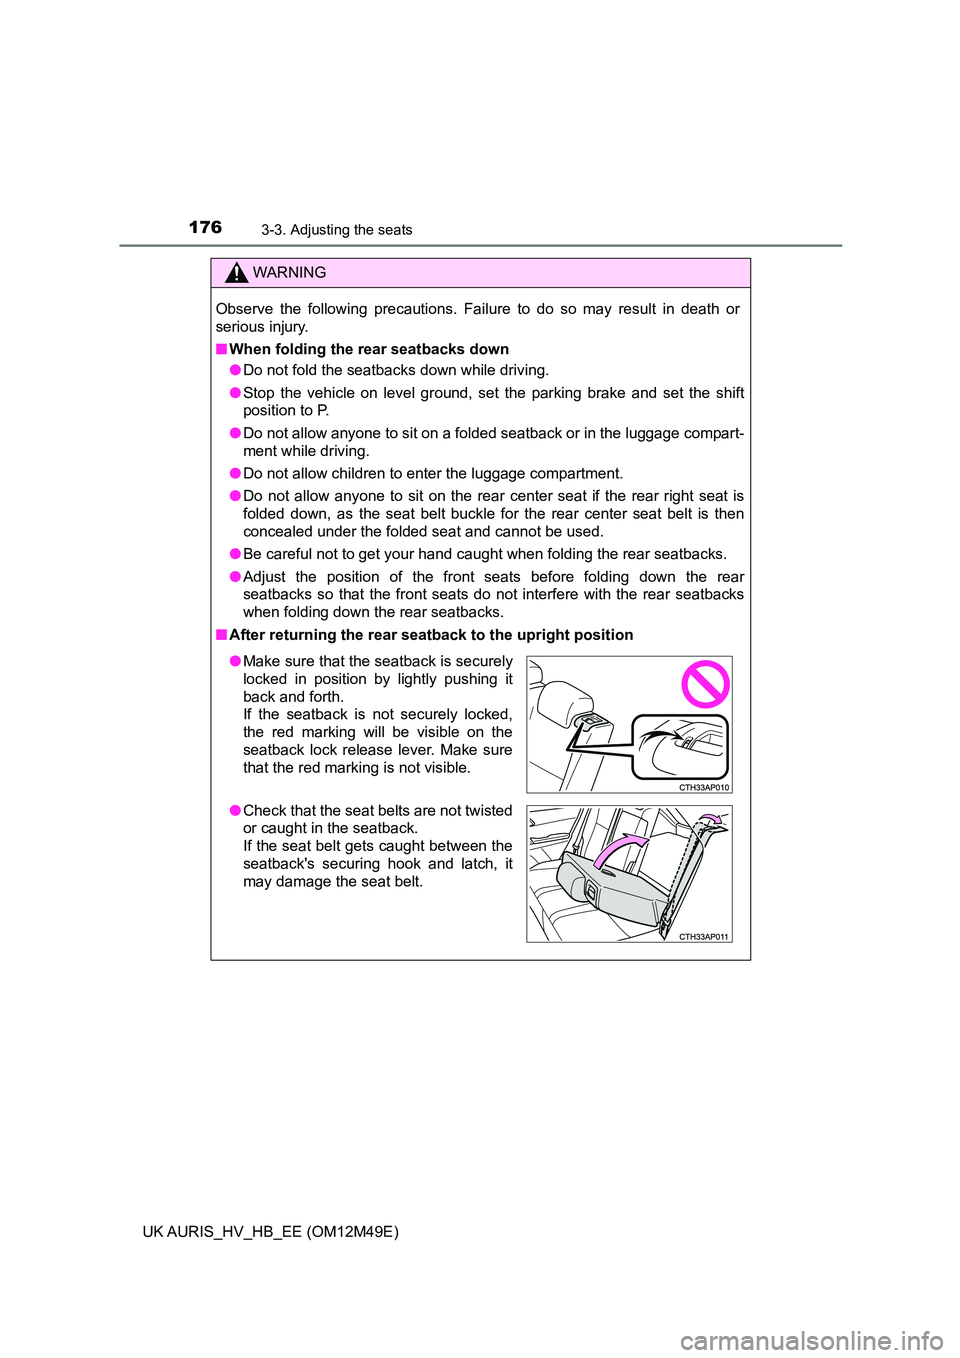 TOYOTA AURIS 2018  Owners Manual (in English) 1763-3. Adjusting the seats
UK AURIS_HV_HB_EE (OM12M49E)
WARNING
Observe the following precautions. Failure to do so may result in death or 
serious injury. 
■ When folding the rear seatbacks down 
